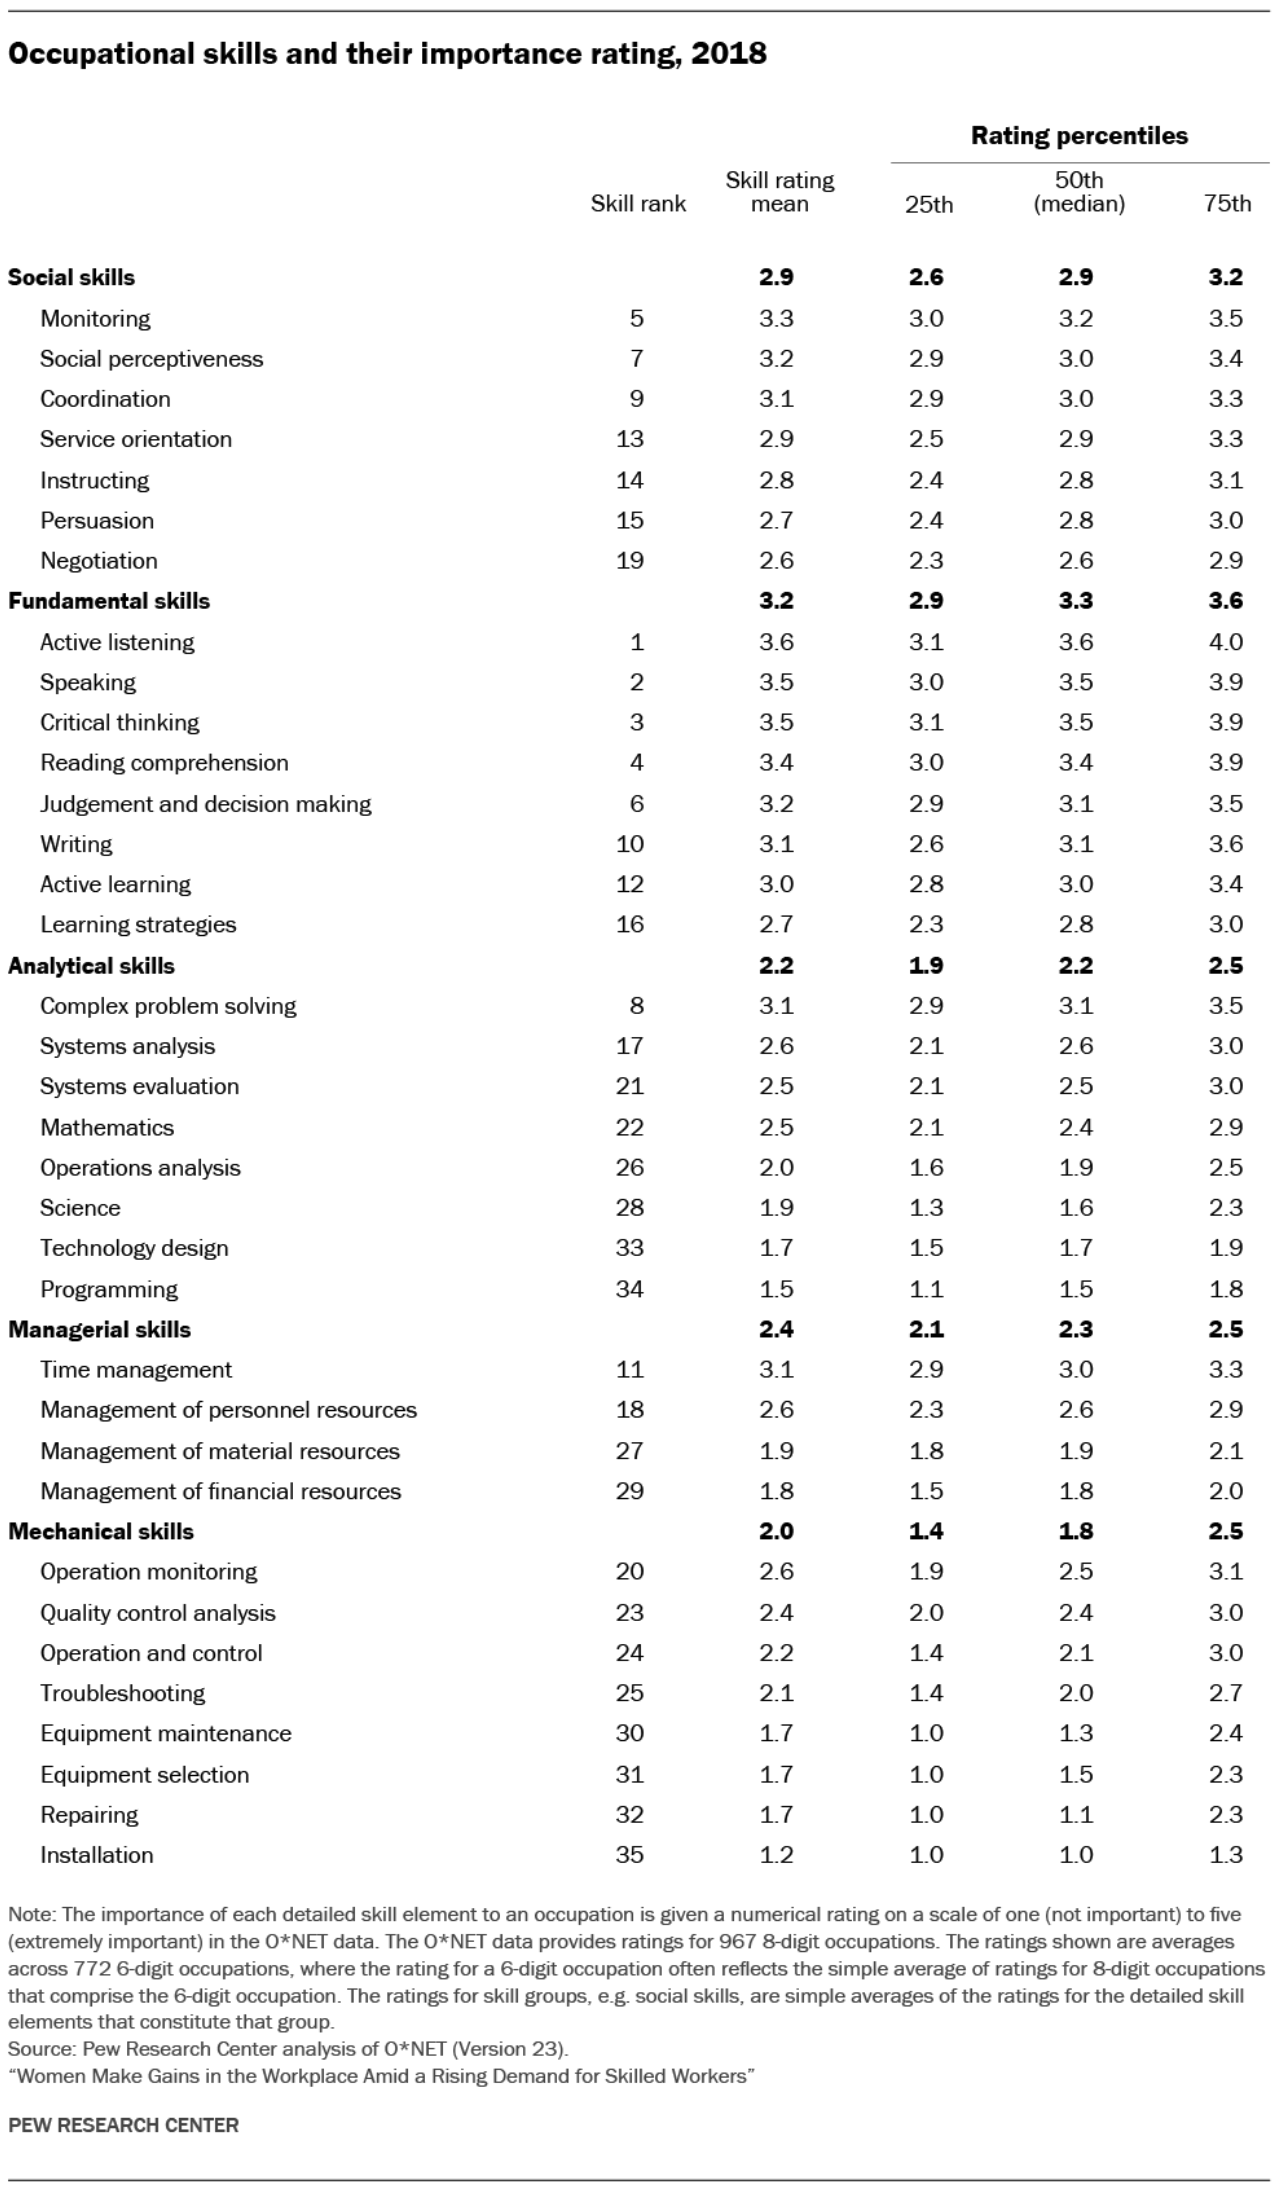 Occupational skills and their importance rating, 2018